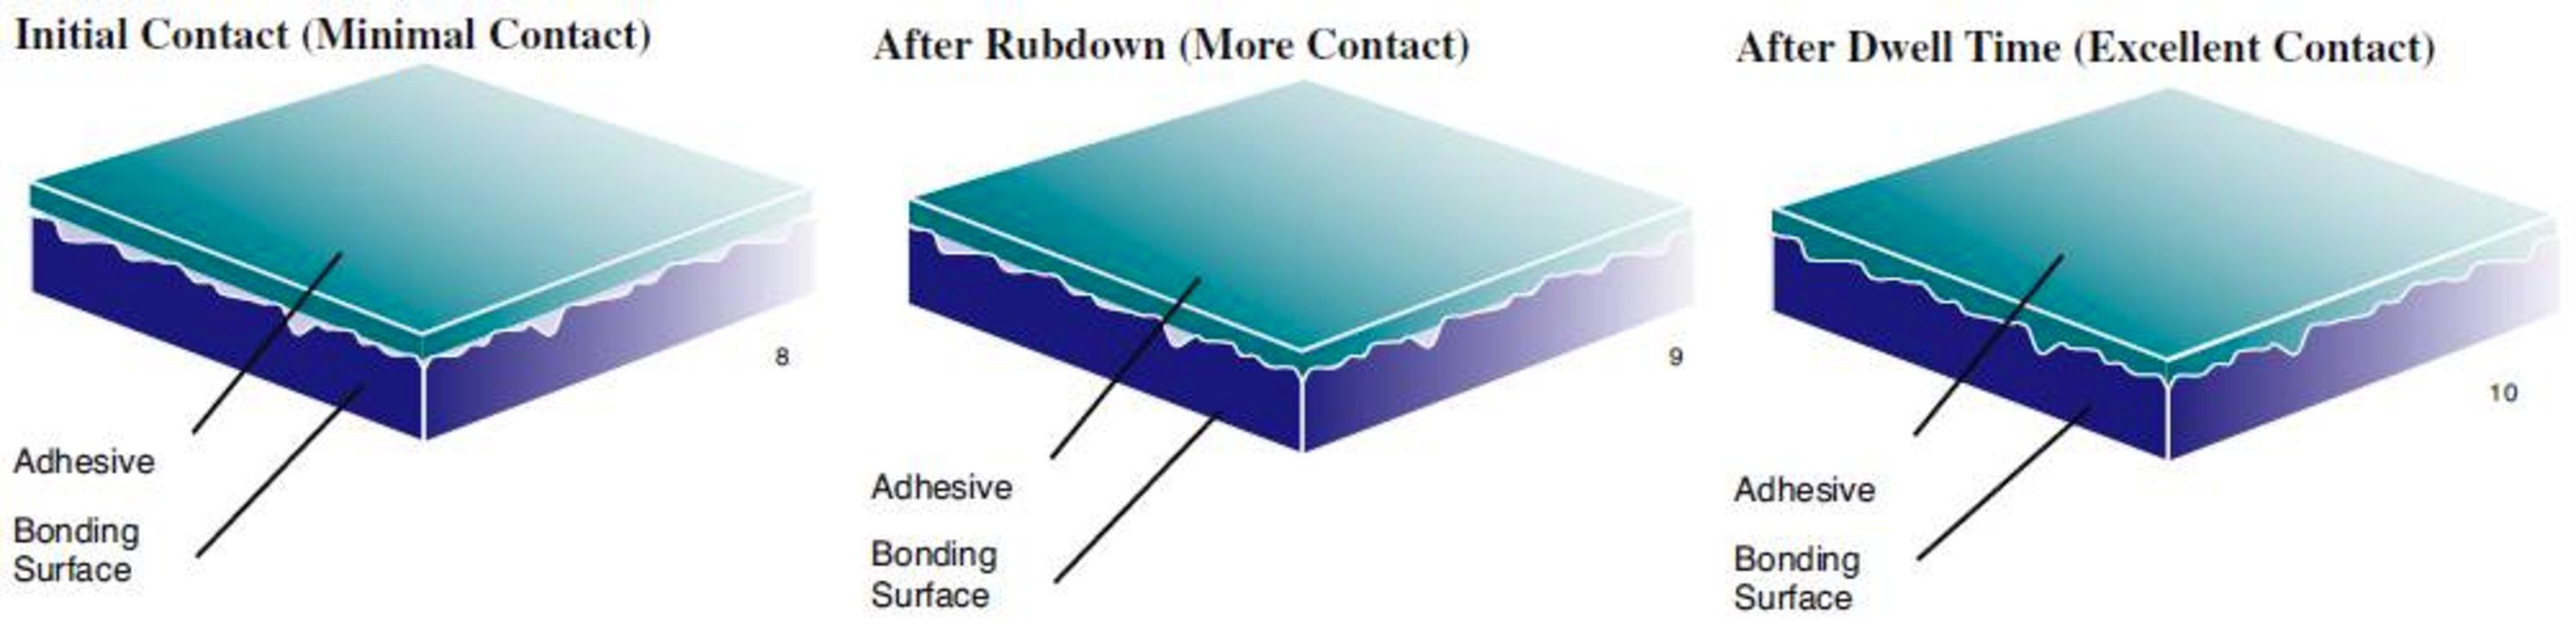 adhesive-surface-bonding-contact-graphic-article-image.jpg